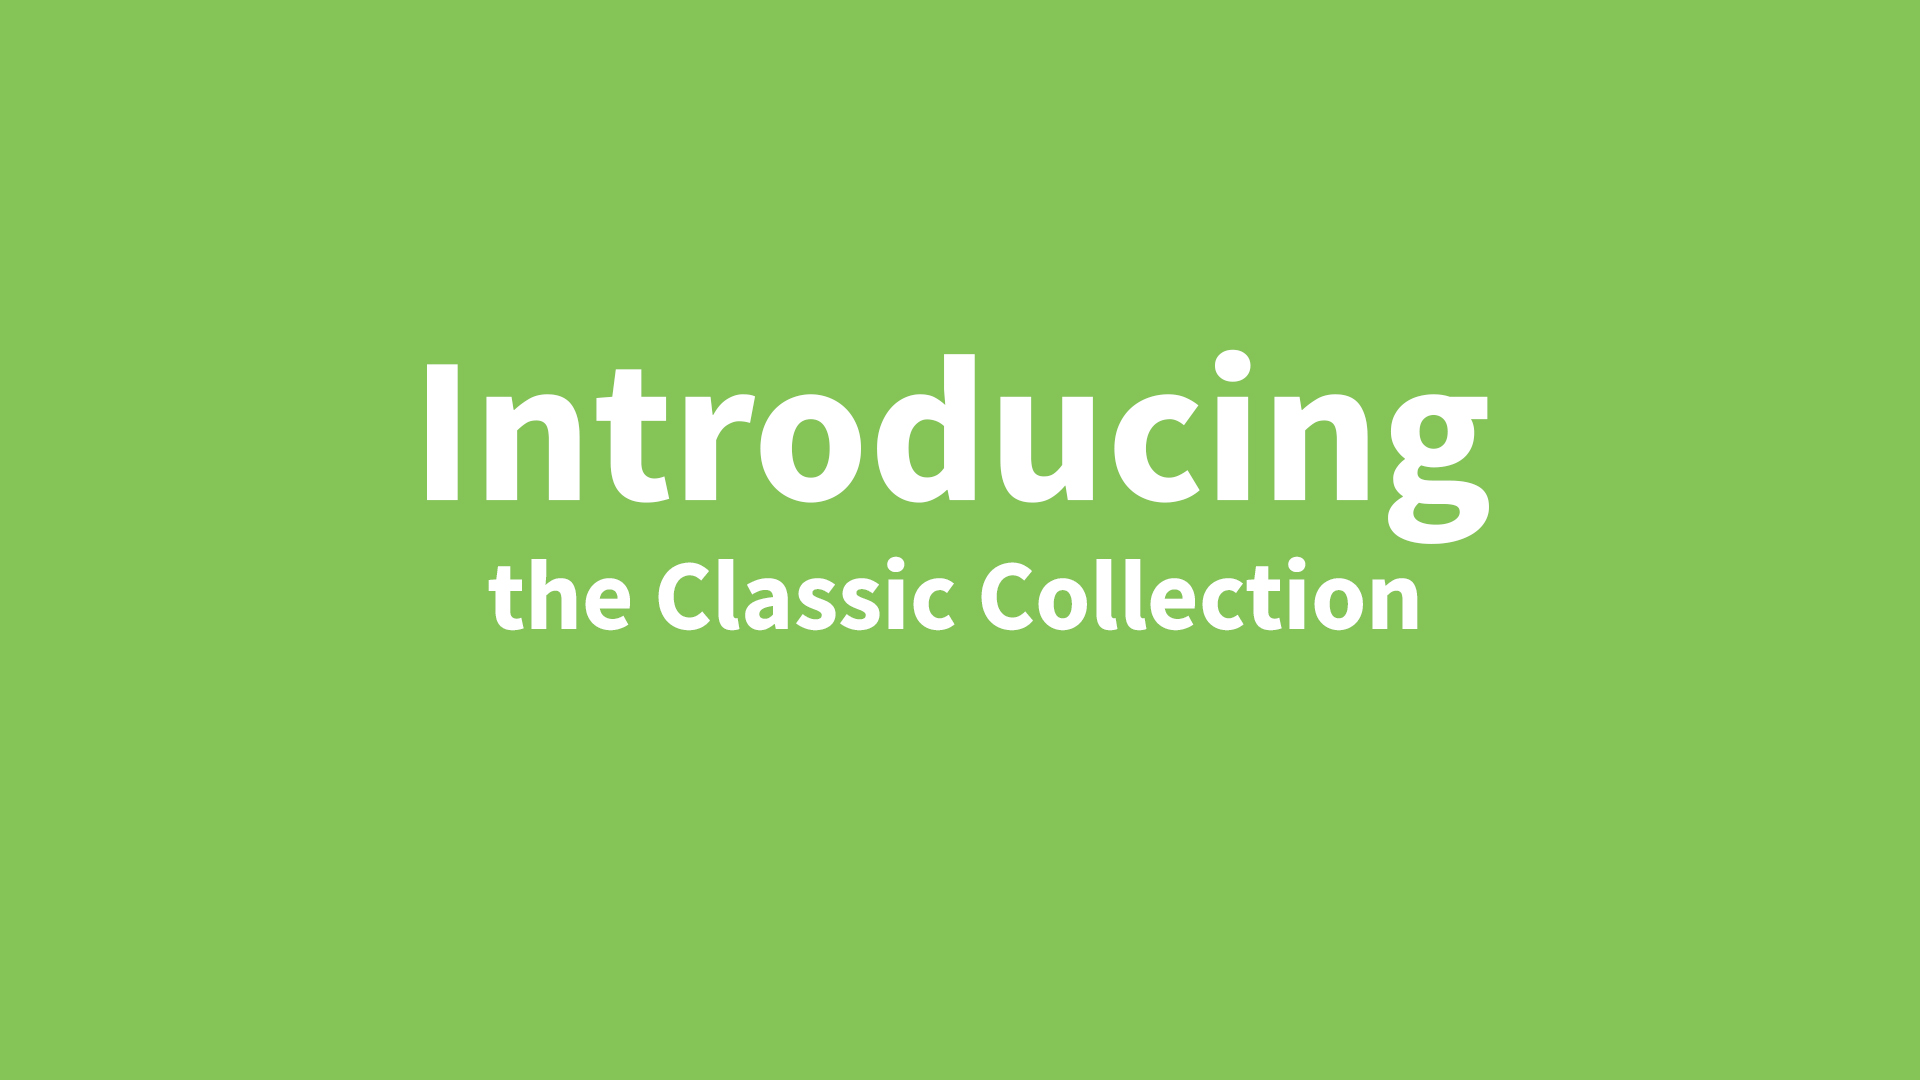 Introducing the Classic Collection